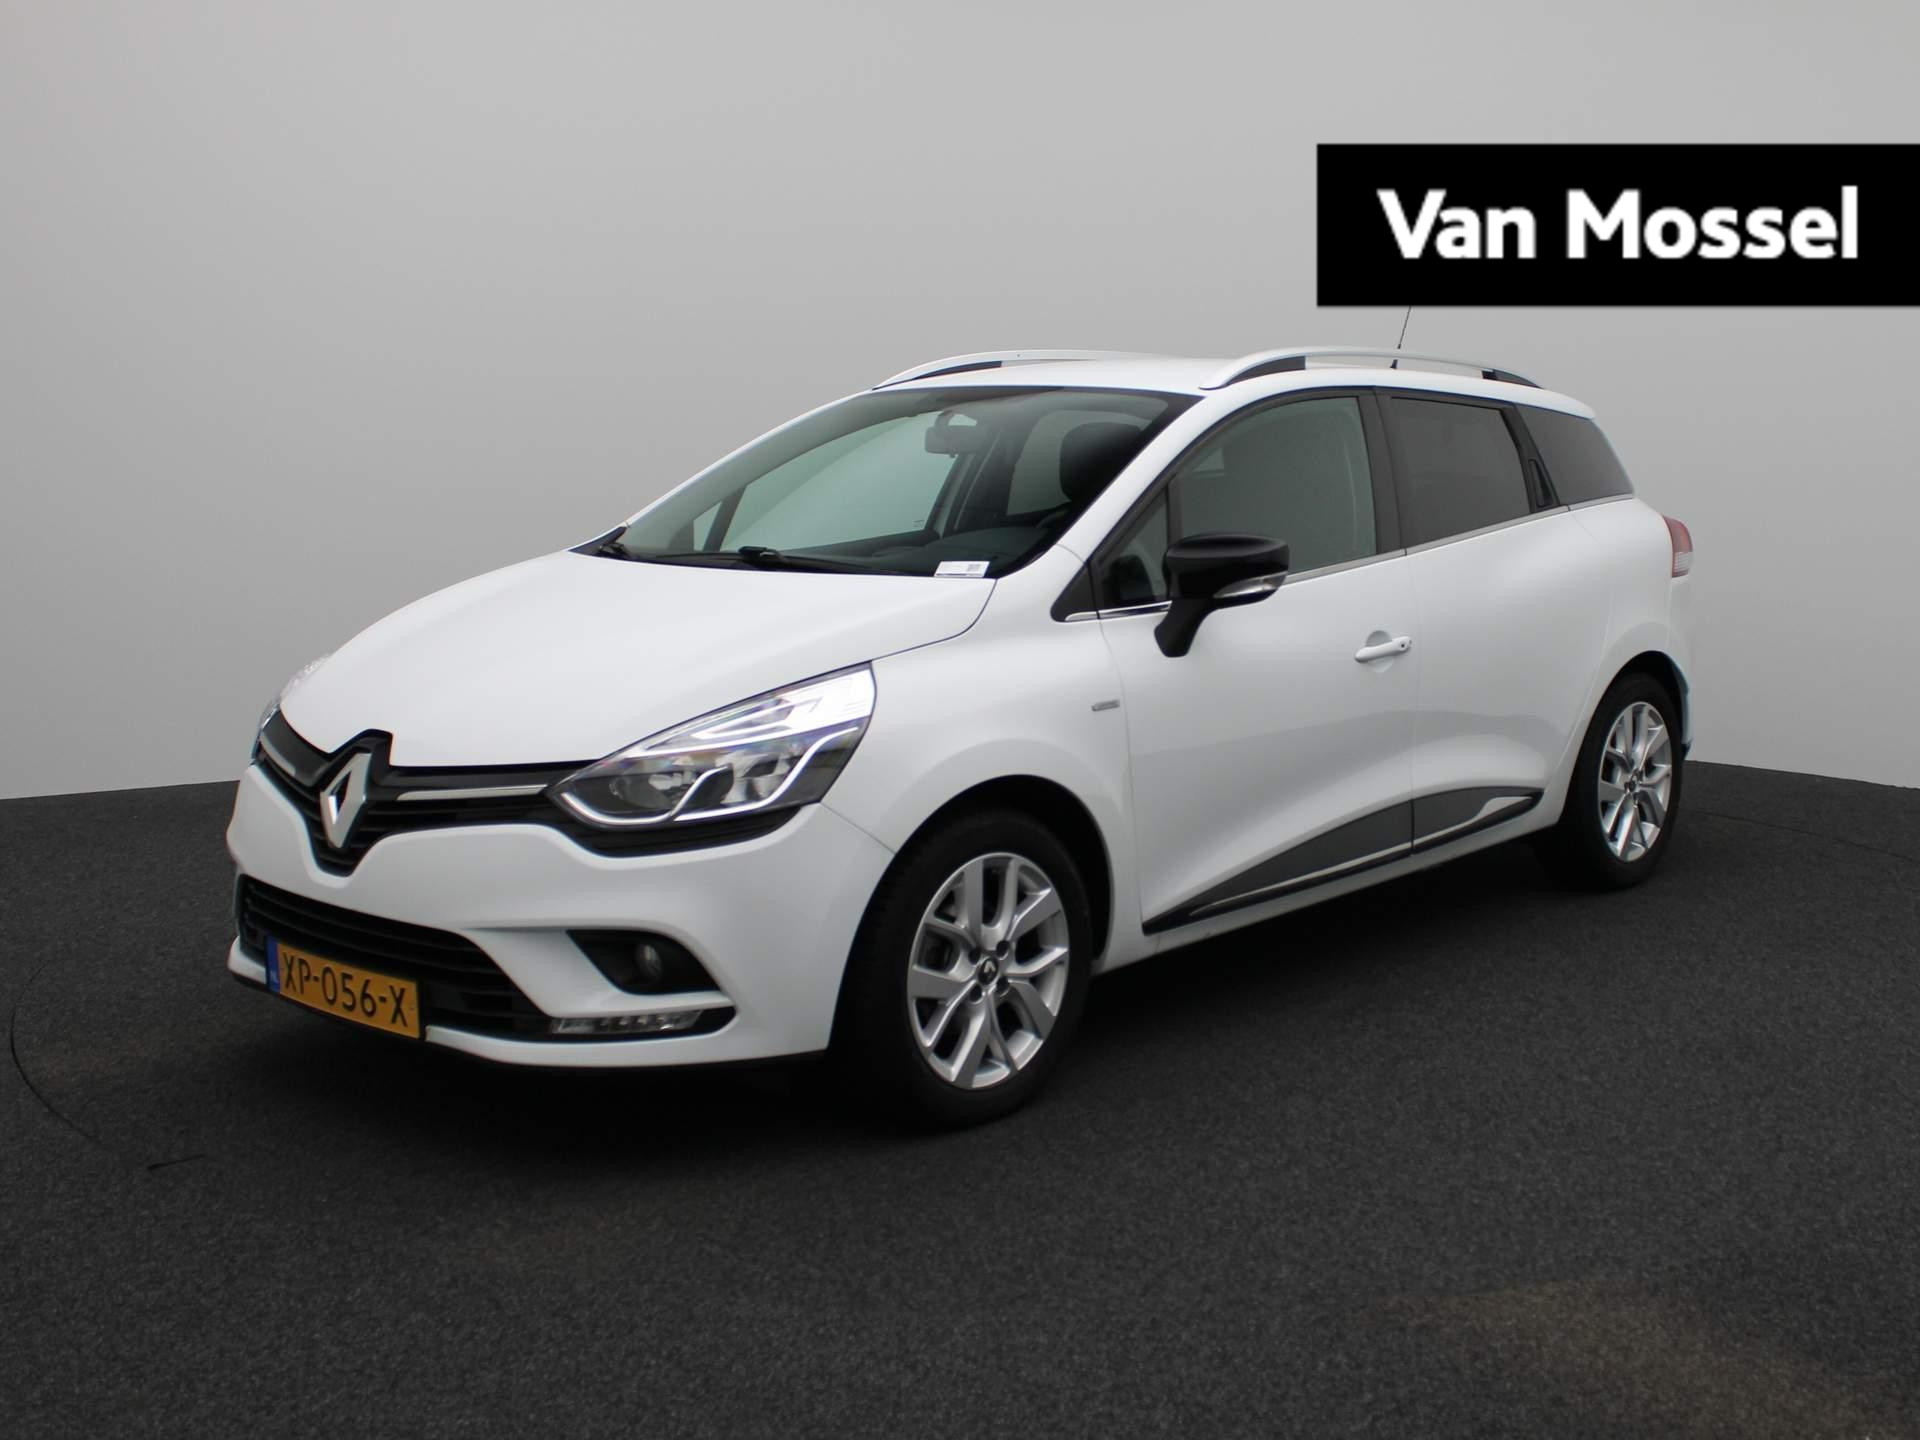 Renault Clio Estate 0.9 TCe Limited | Trekhaak | Full-Map Navigatie | Keyless | PDC Achter | 16" LMV | Cruise Control & Snelheidsbegrenzer | Privacy Glass | Apple Carplay & Android Auto